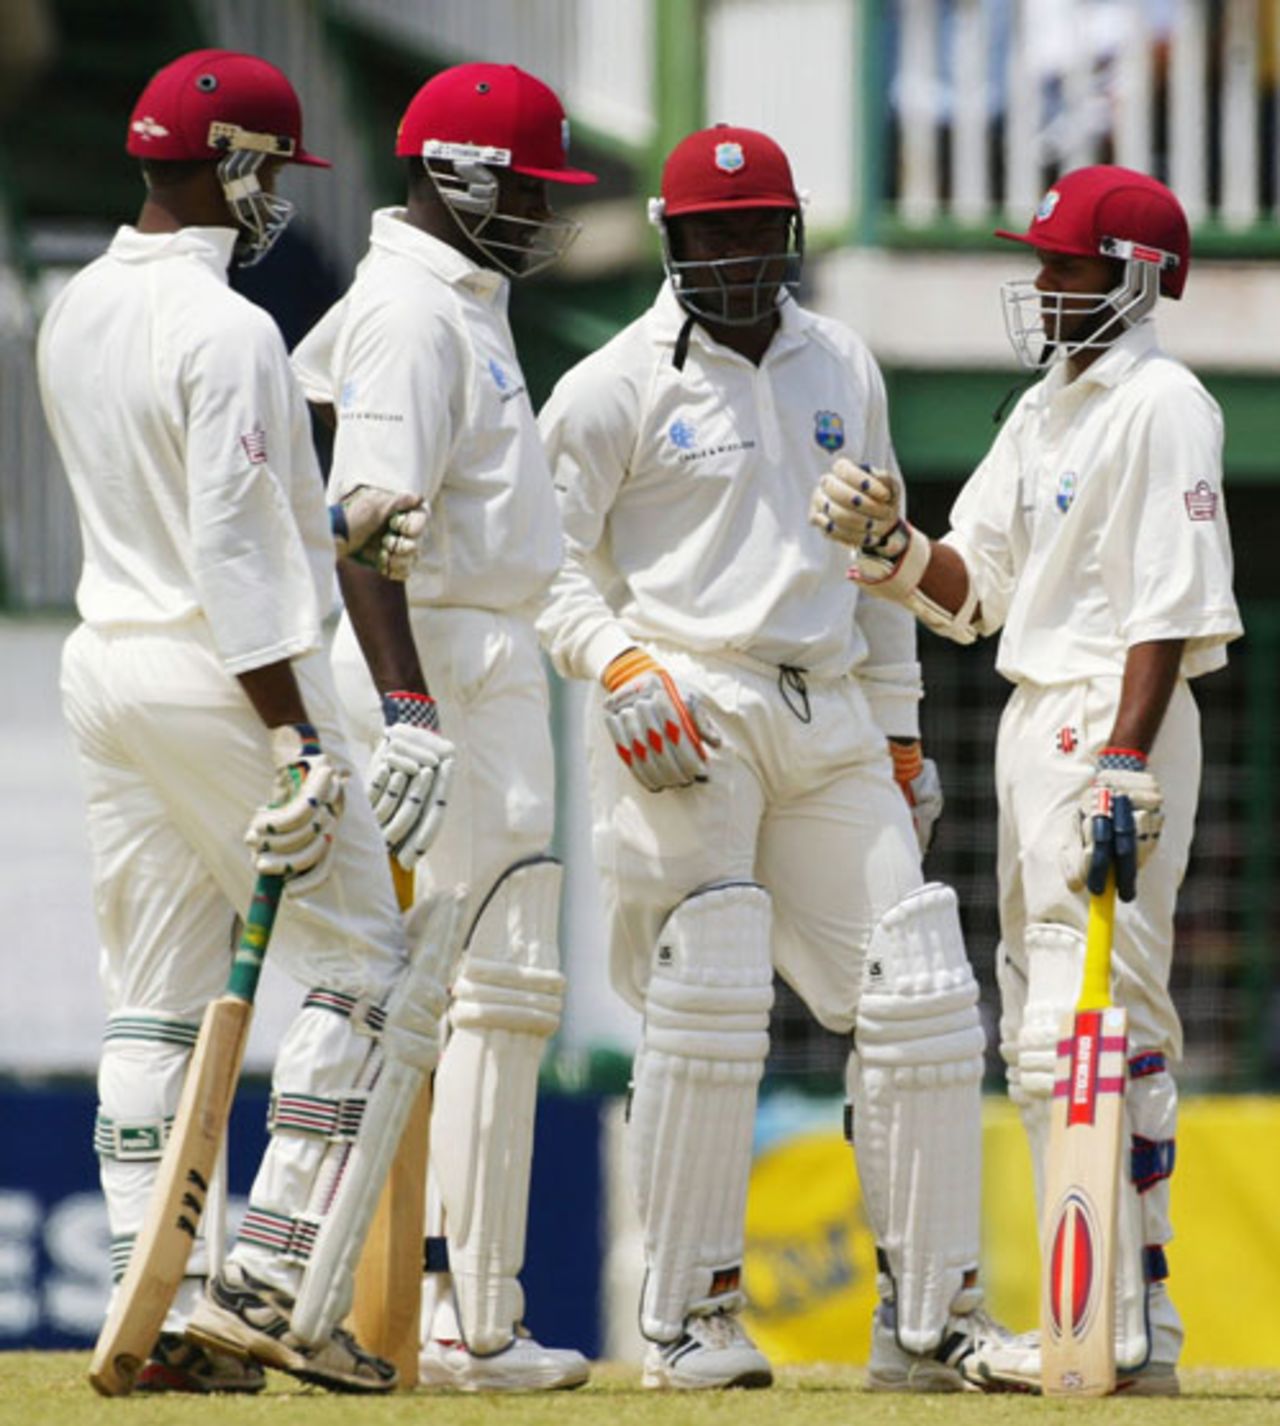 Ridley Jacobs, Wavell Hinds (Jacobs's runner), Shivnarine Chanderpaul, and Marlon Samuels (Chanderpaul's runner) have a conference, West Indies v Australia, 1st Test, Bourda Oval, Guyana, April 13, 2003